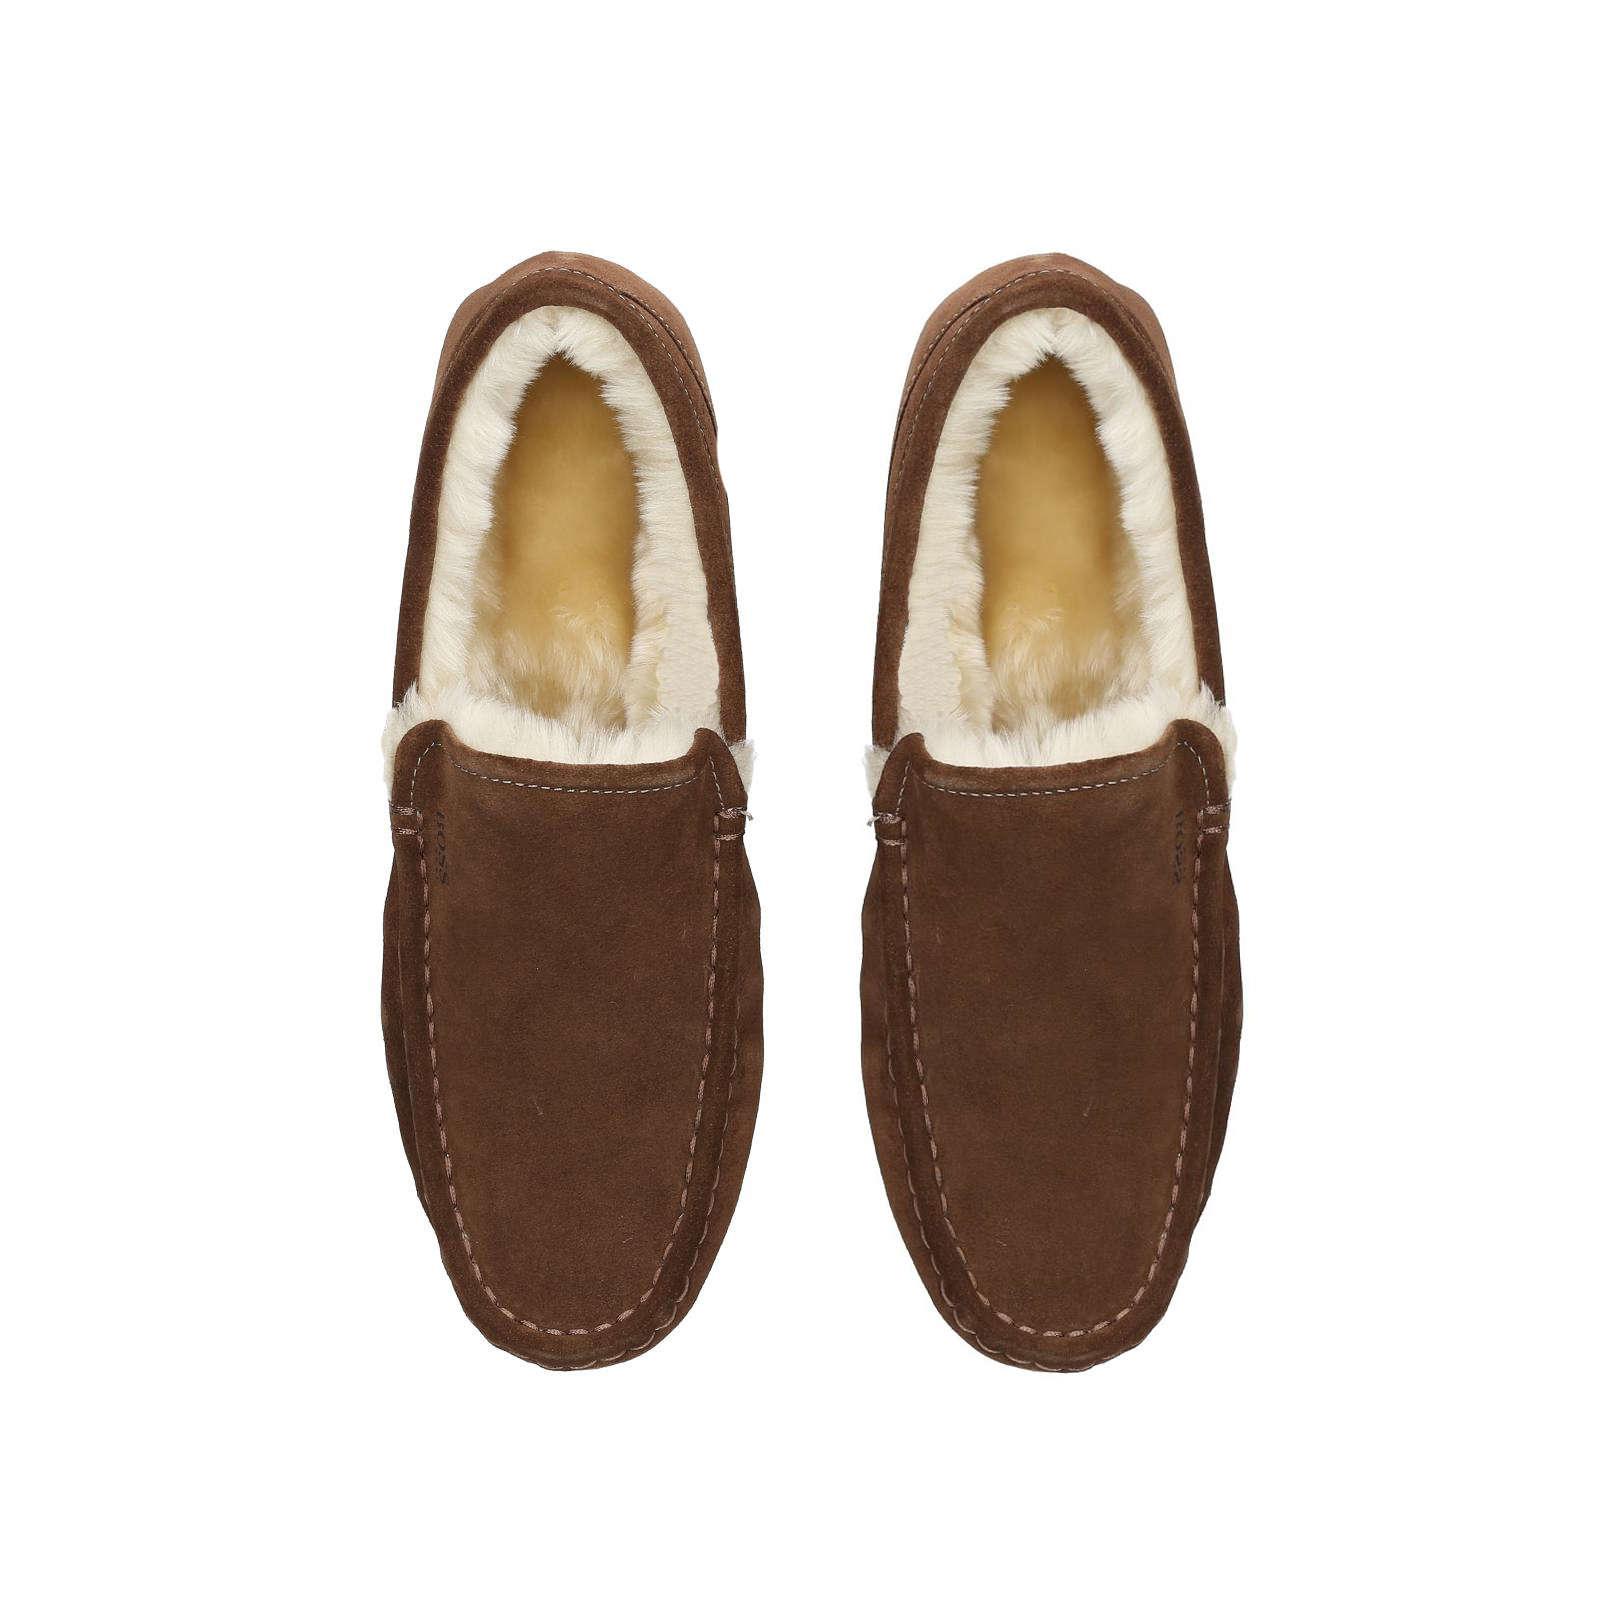 BOSS by Hugo Boss Brown Suede Moccasin Slippers for Men - Lyst